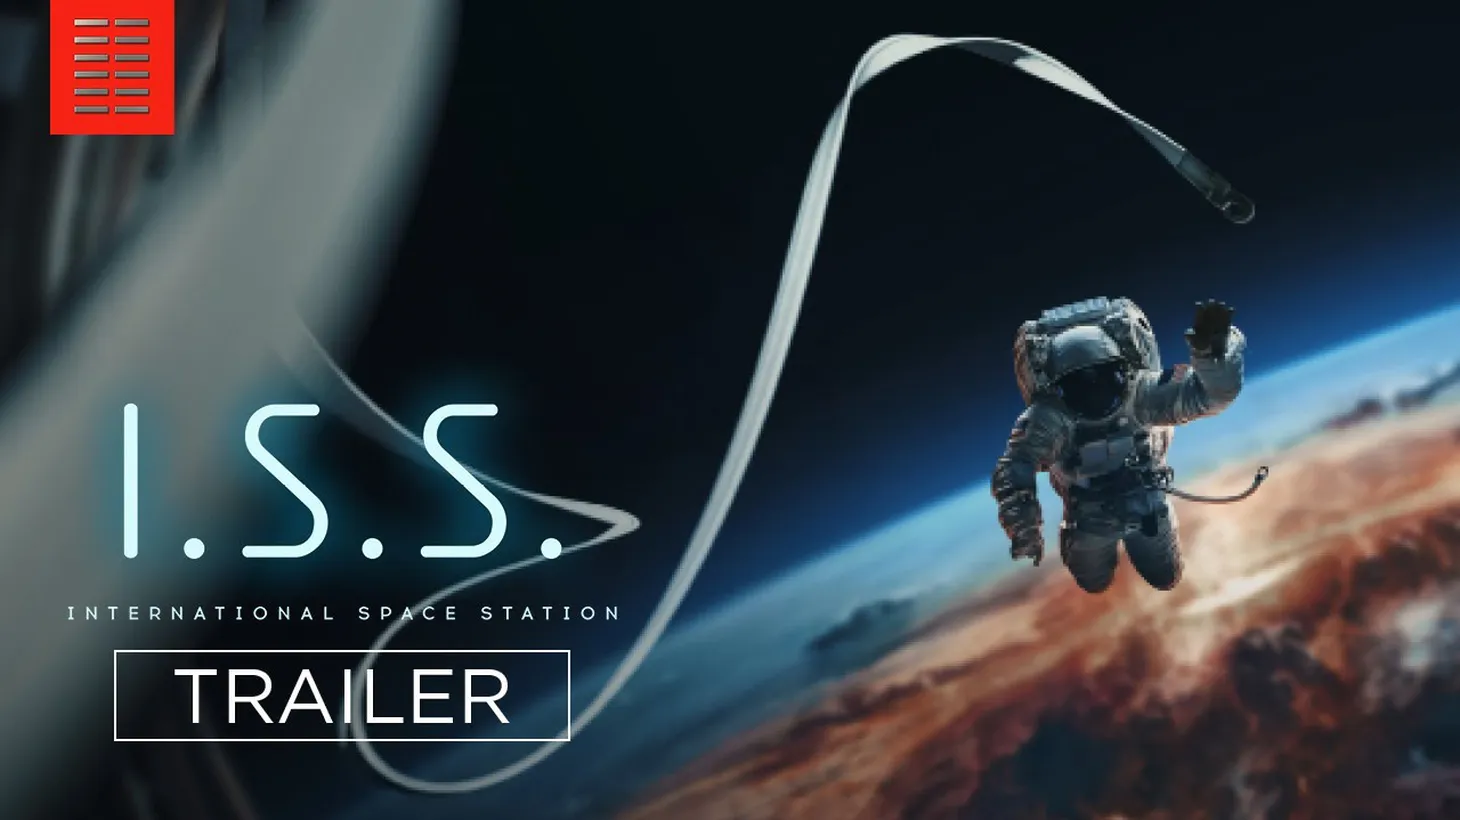 Academy Award winner Ariana DeBose and Chris Messina play astronauts who watch a war break out on Earth below them in “I.S.S.”